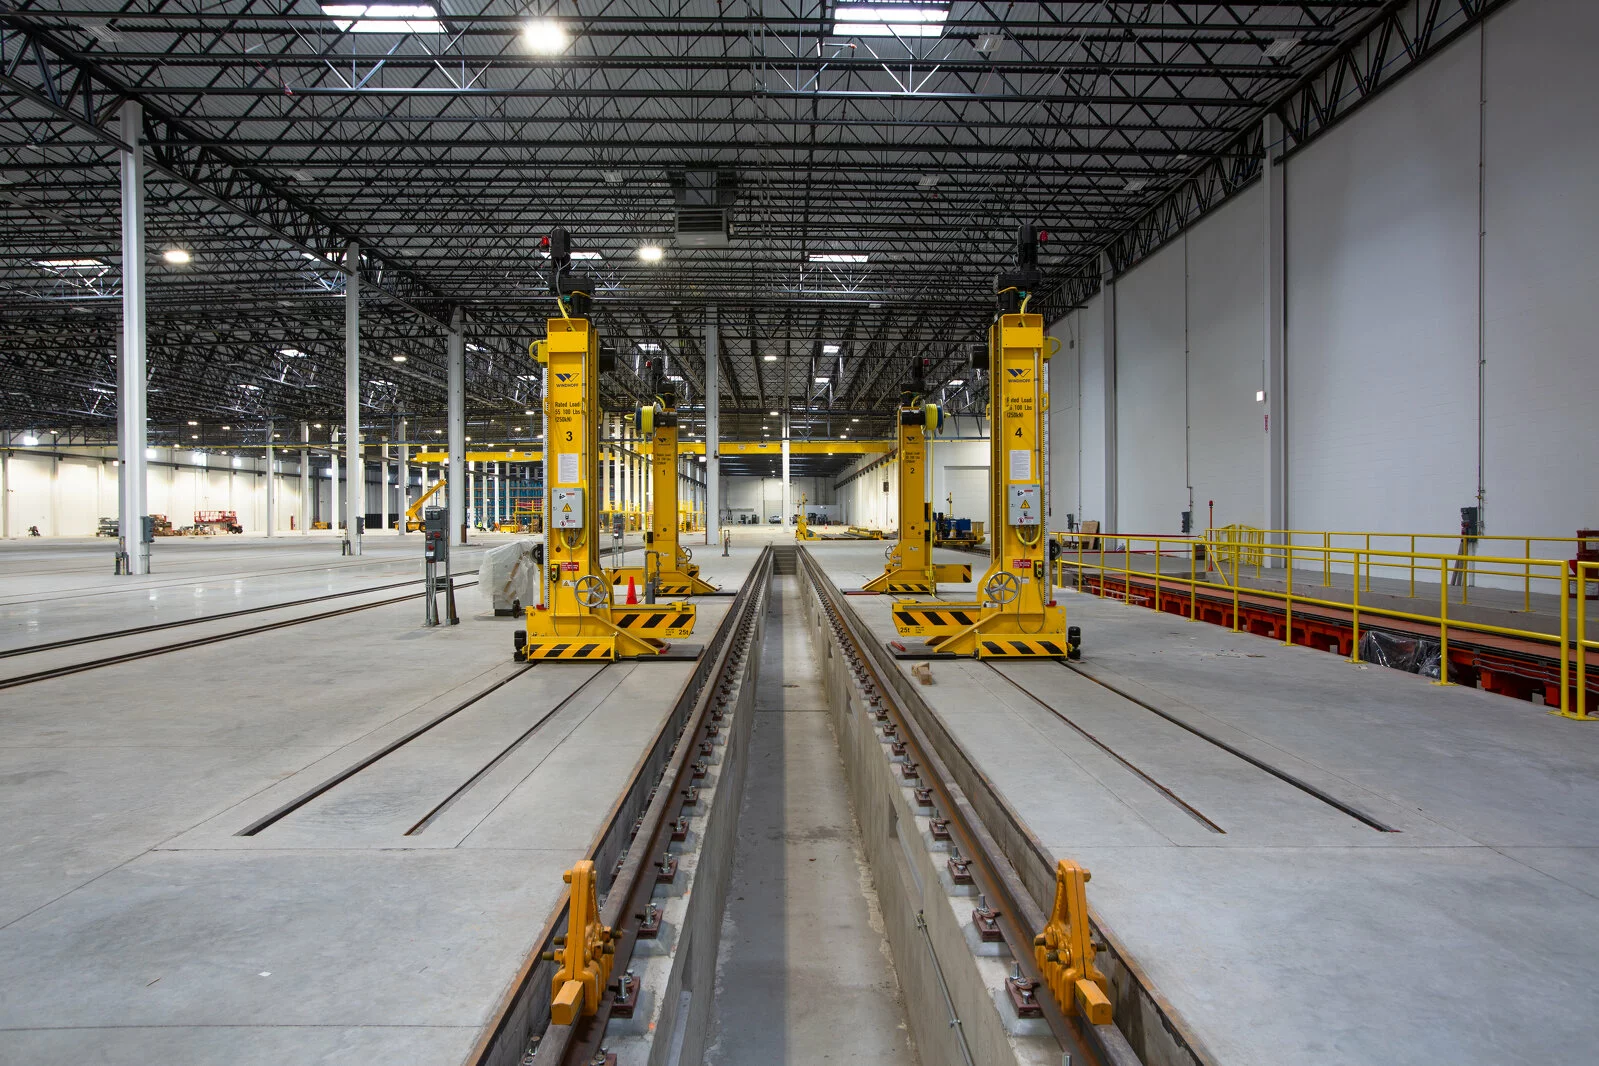 Interior CRRC Warehouse, rail tracks, specialized machinery, vast empty warehouse, concrete floor, white walls, high ceilings.